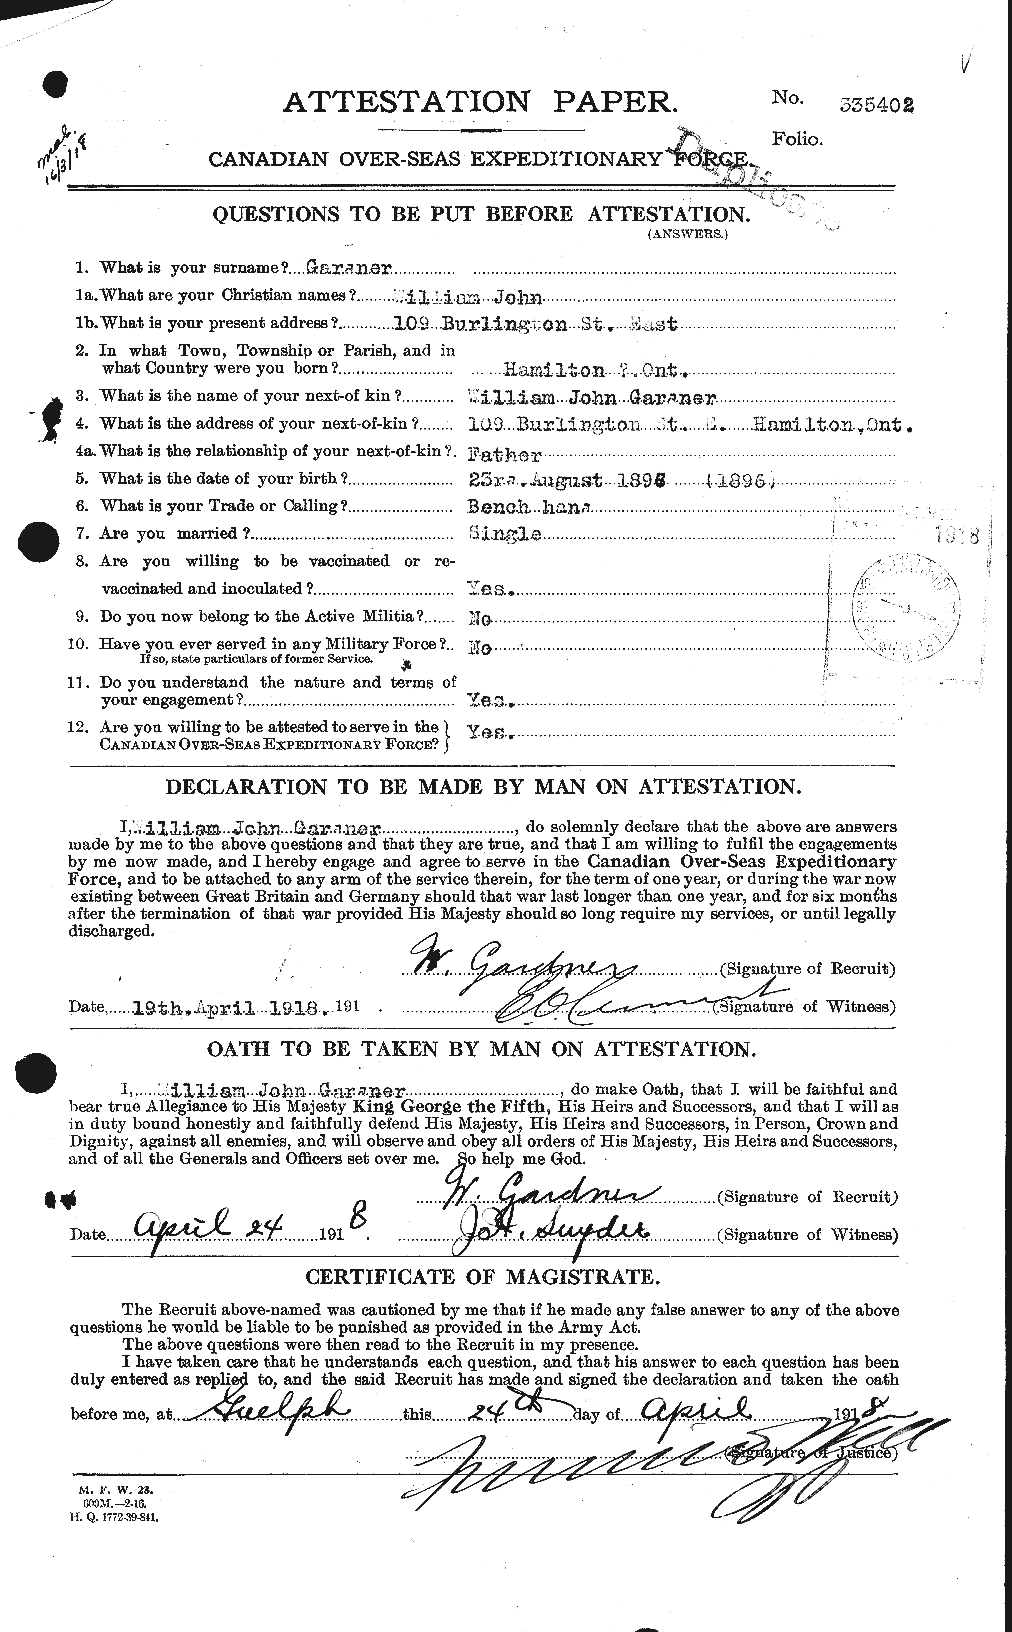 Personnel Records of the First World War - CEF 342571a